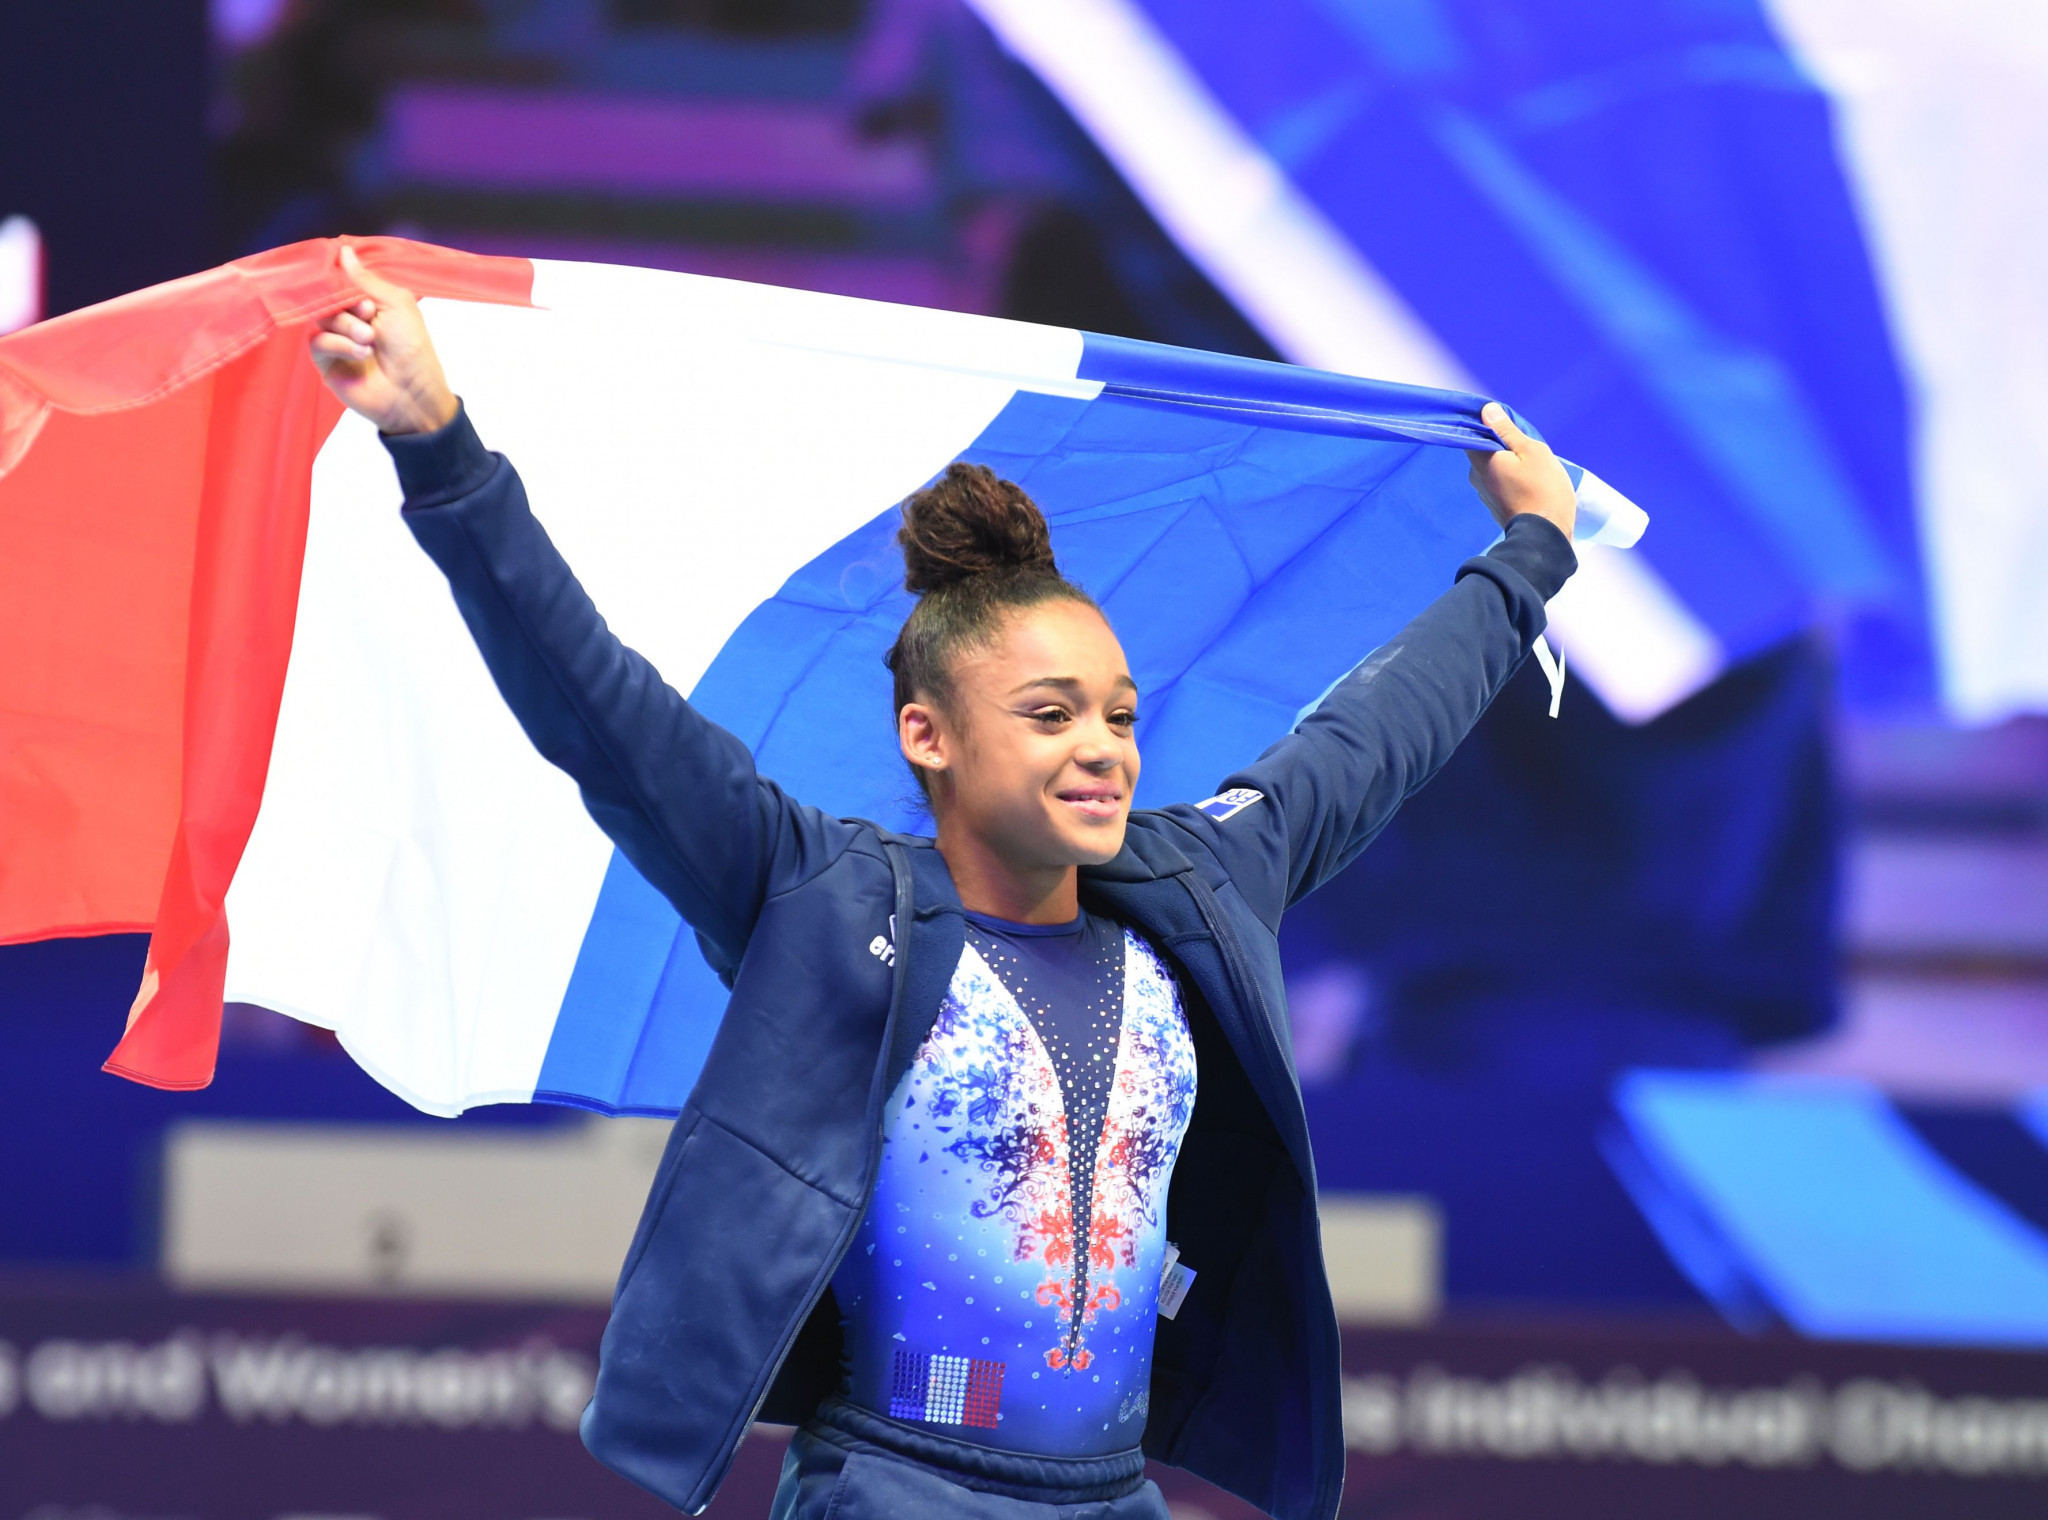 France's Melanie De Jesus Dos Santos took the women's all-around title at the European Artistic Gymnastics Individual Championships ©Getty Images